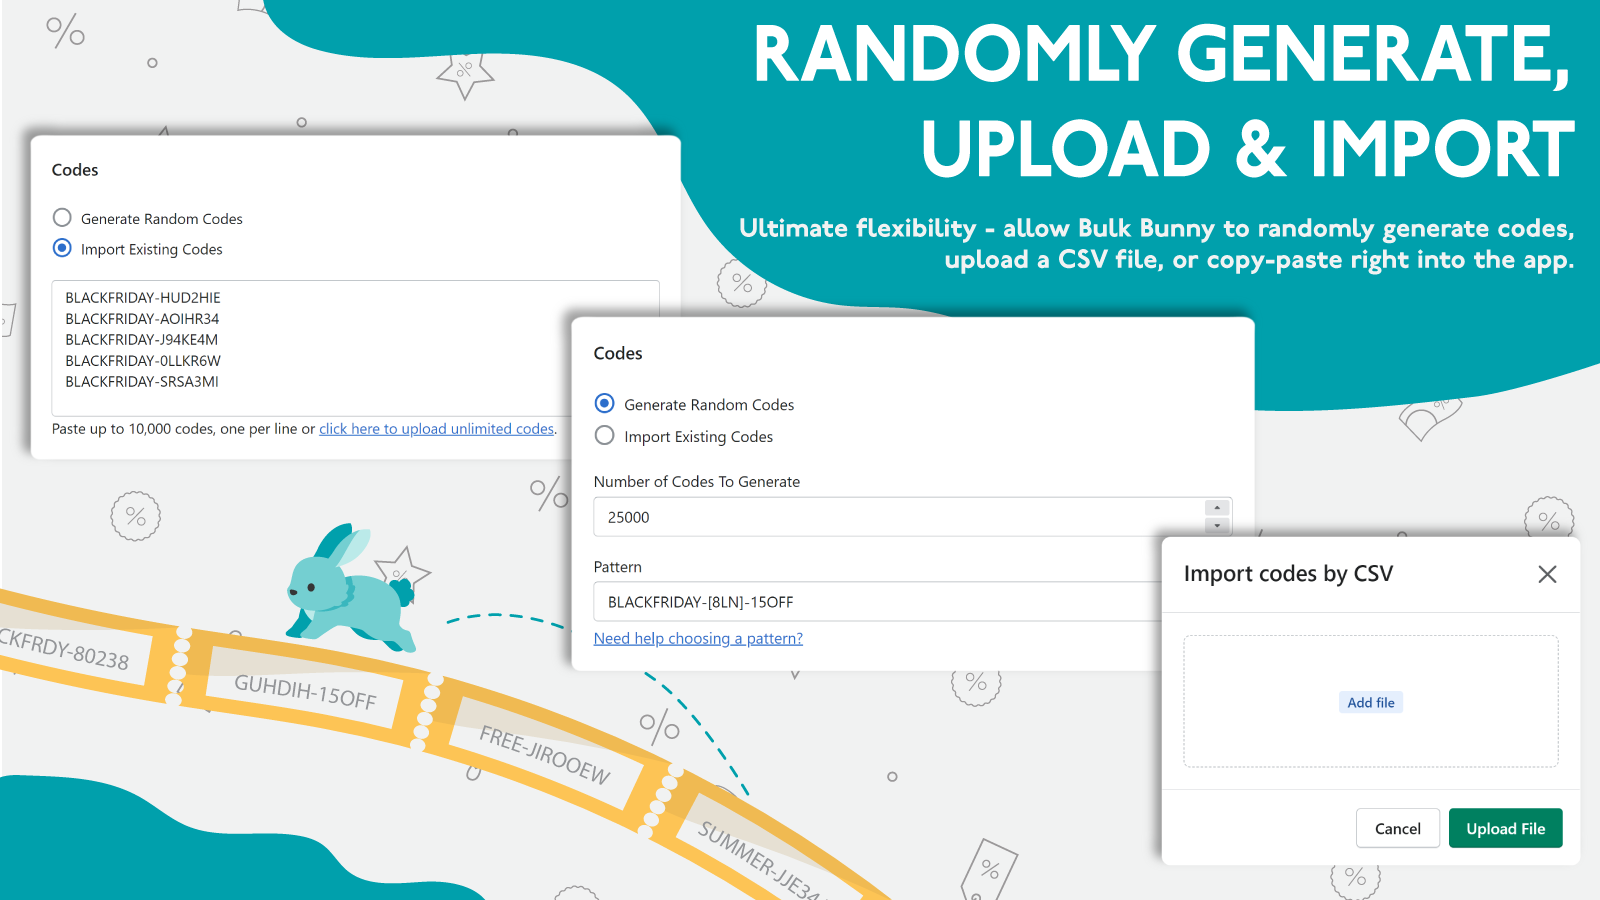 Randomly Generate, Upload & Import - easily add discount codes